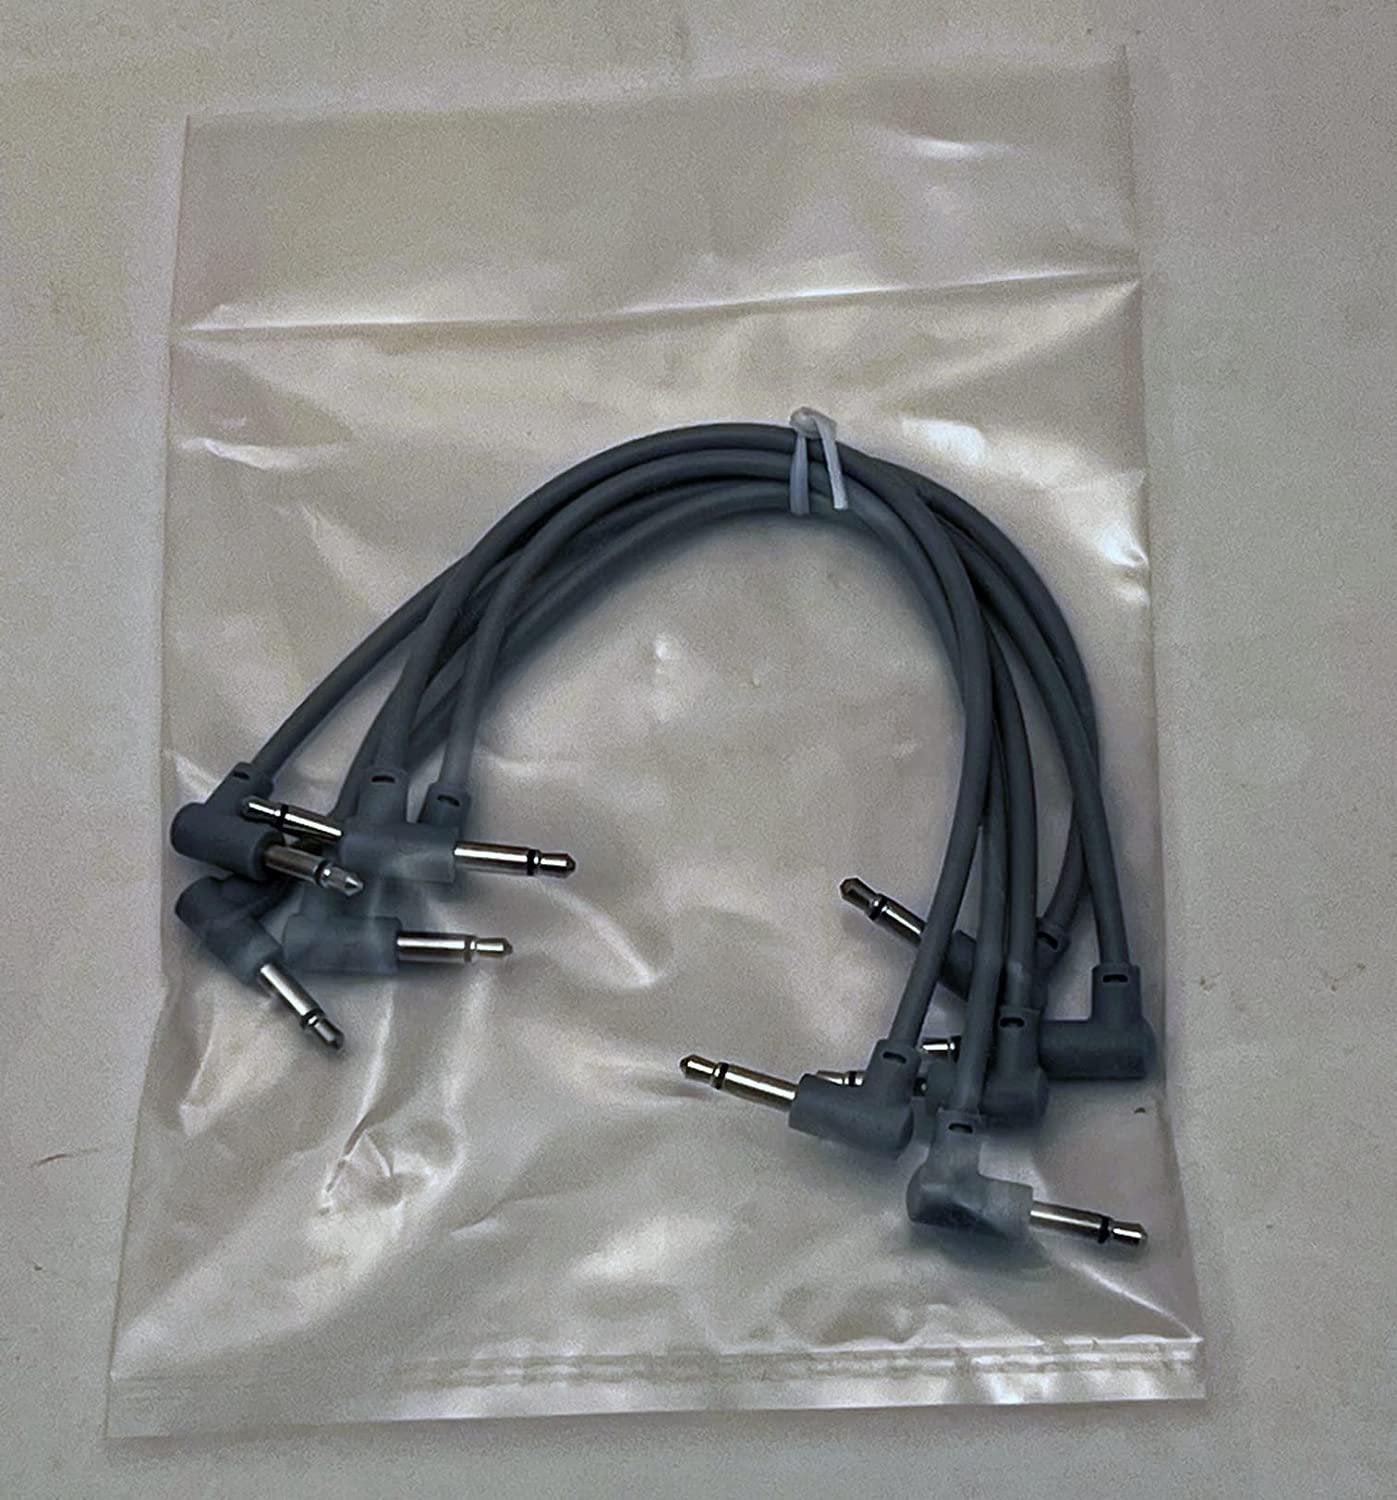 Luigis Modular M-PAR Right Angled Eurorack Patch Cables - Package of 5 Gray Cables, 6" (15 cm)